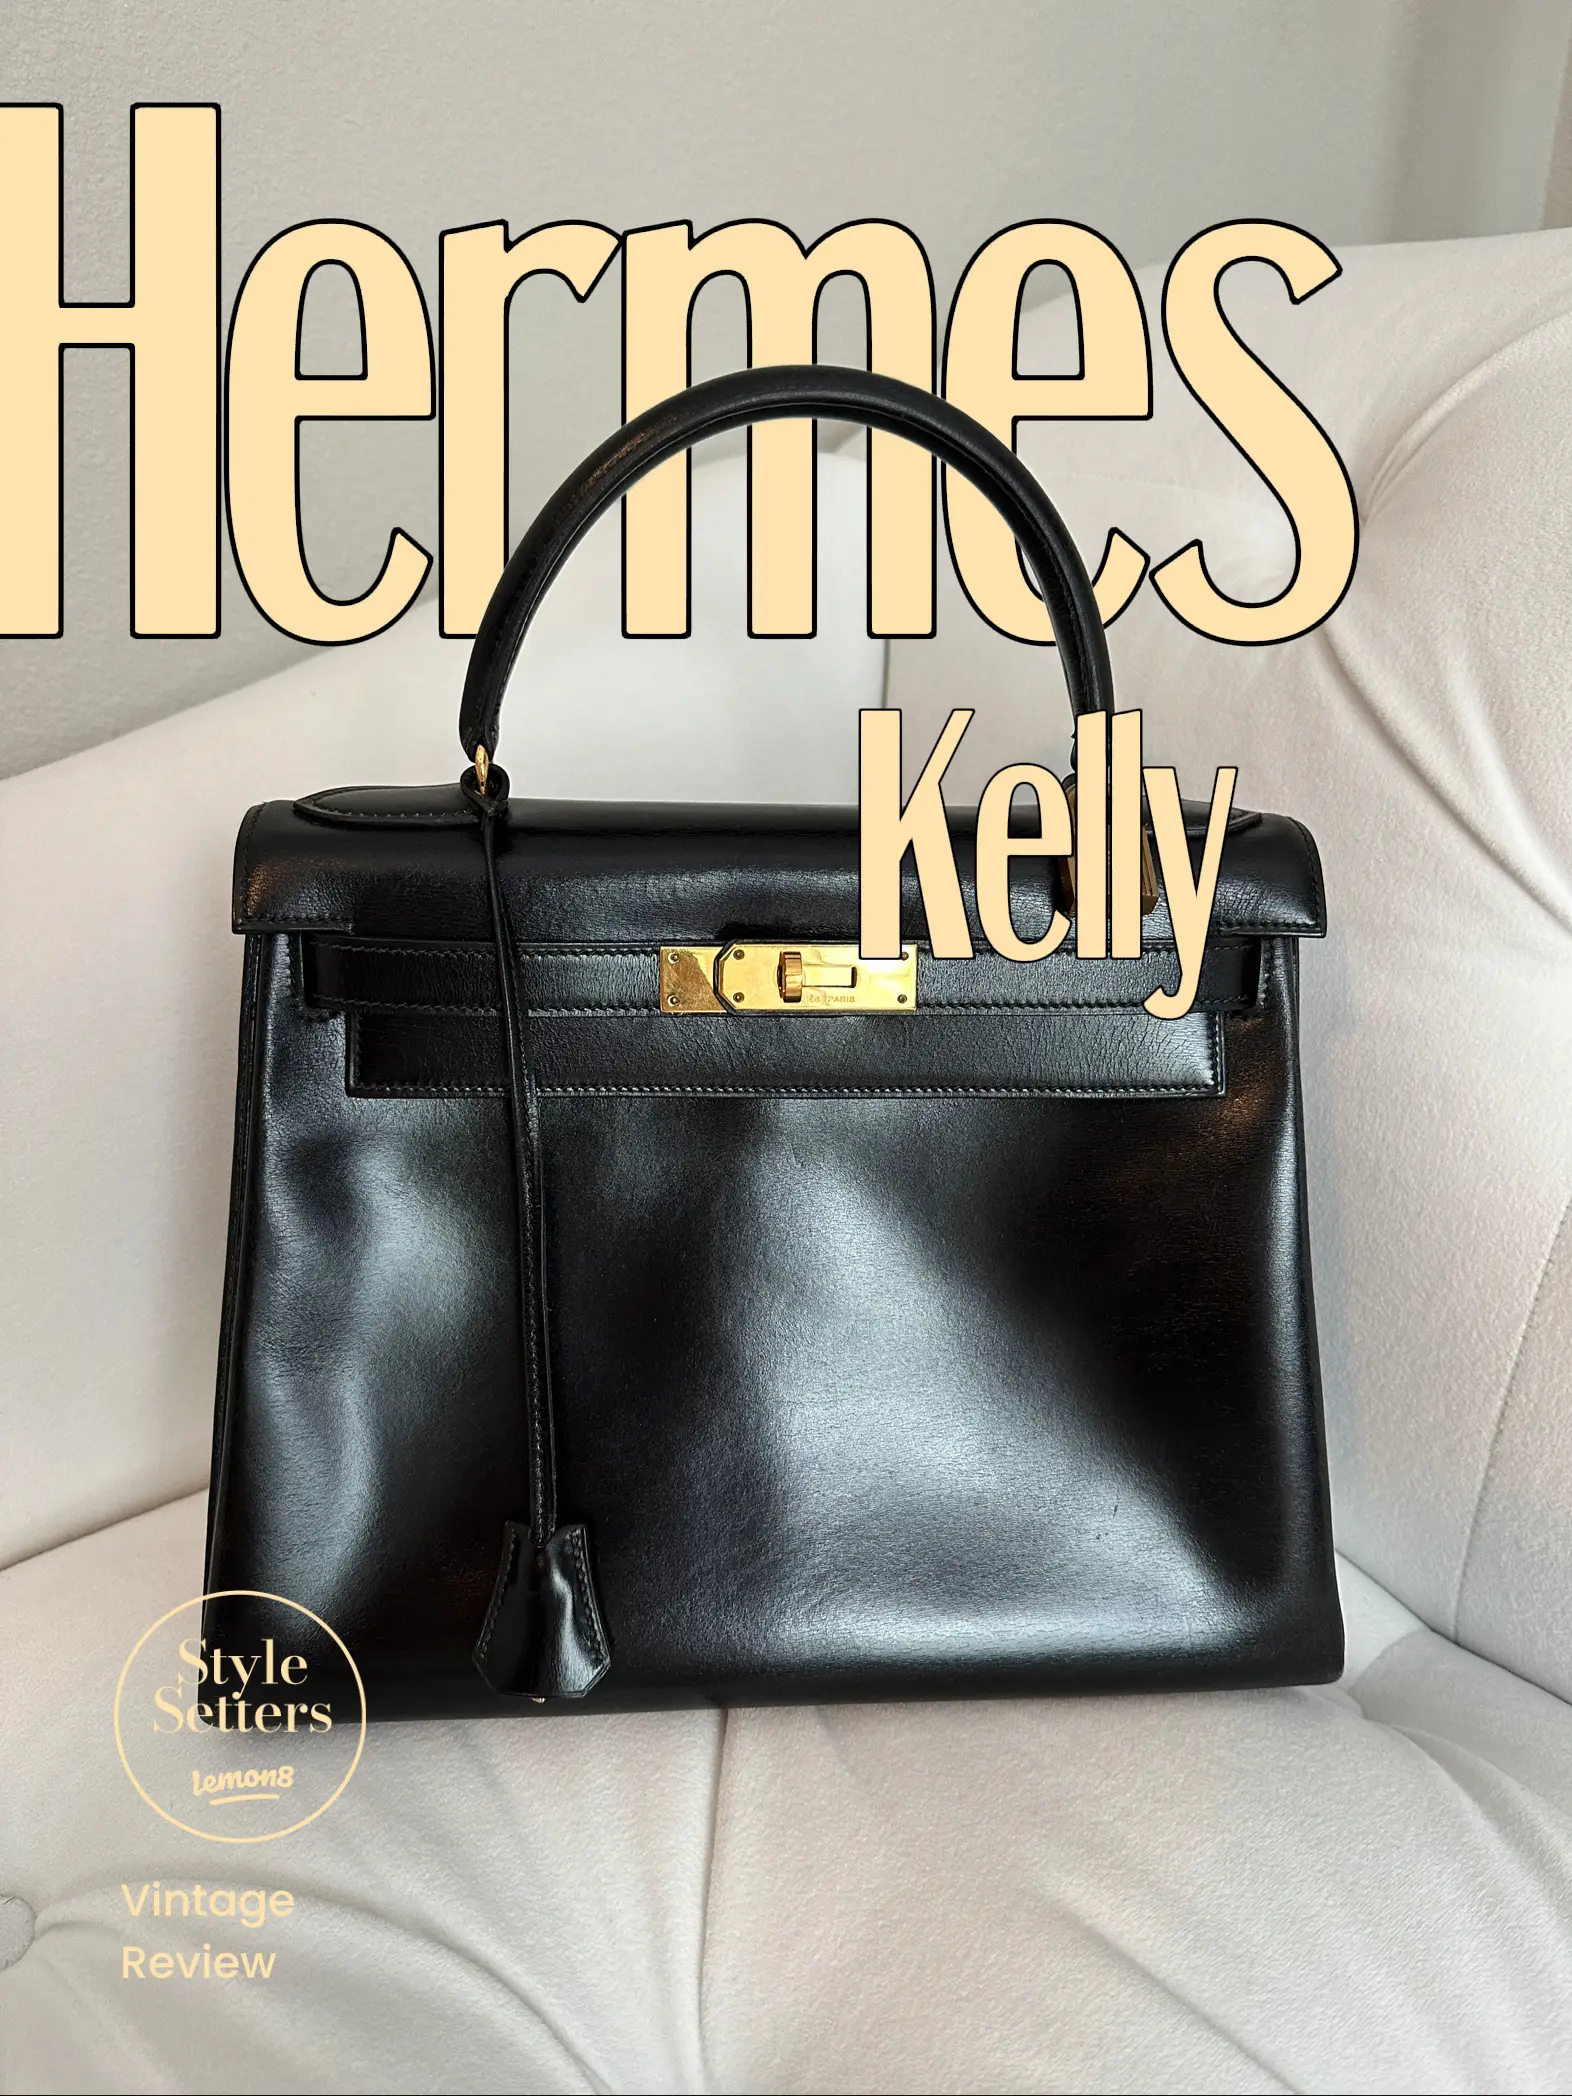 Hermes Kelly 25 and Kelly 28 comparison  Hermes Kelly 25 or Kelly 28? 